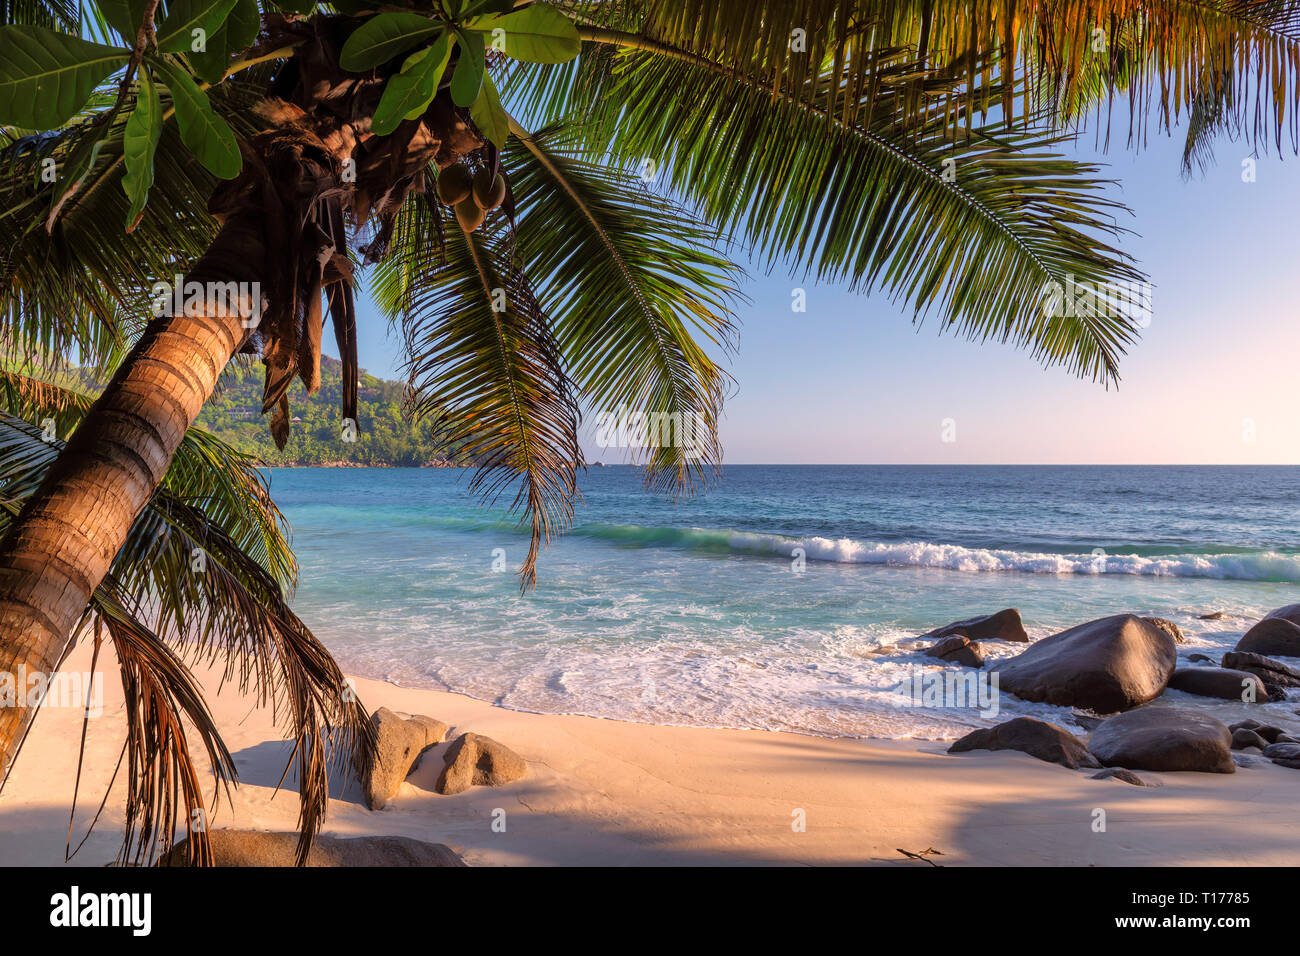 Exotic beach at sunset on tropical island, Seychelles. Stock Photo